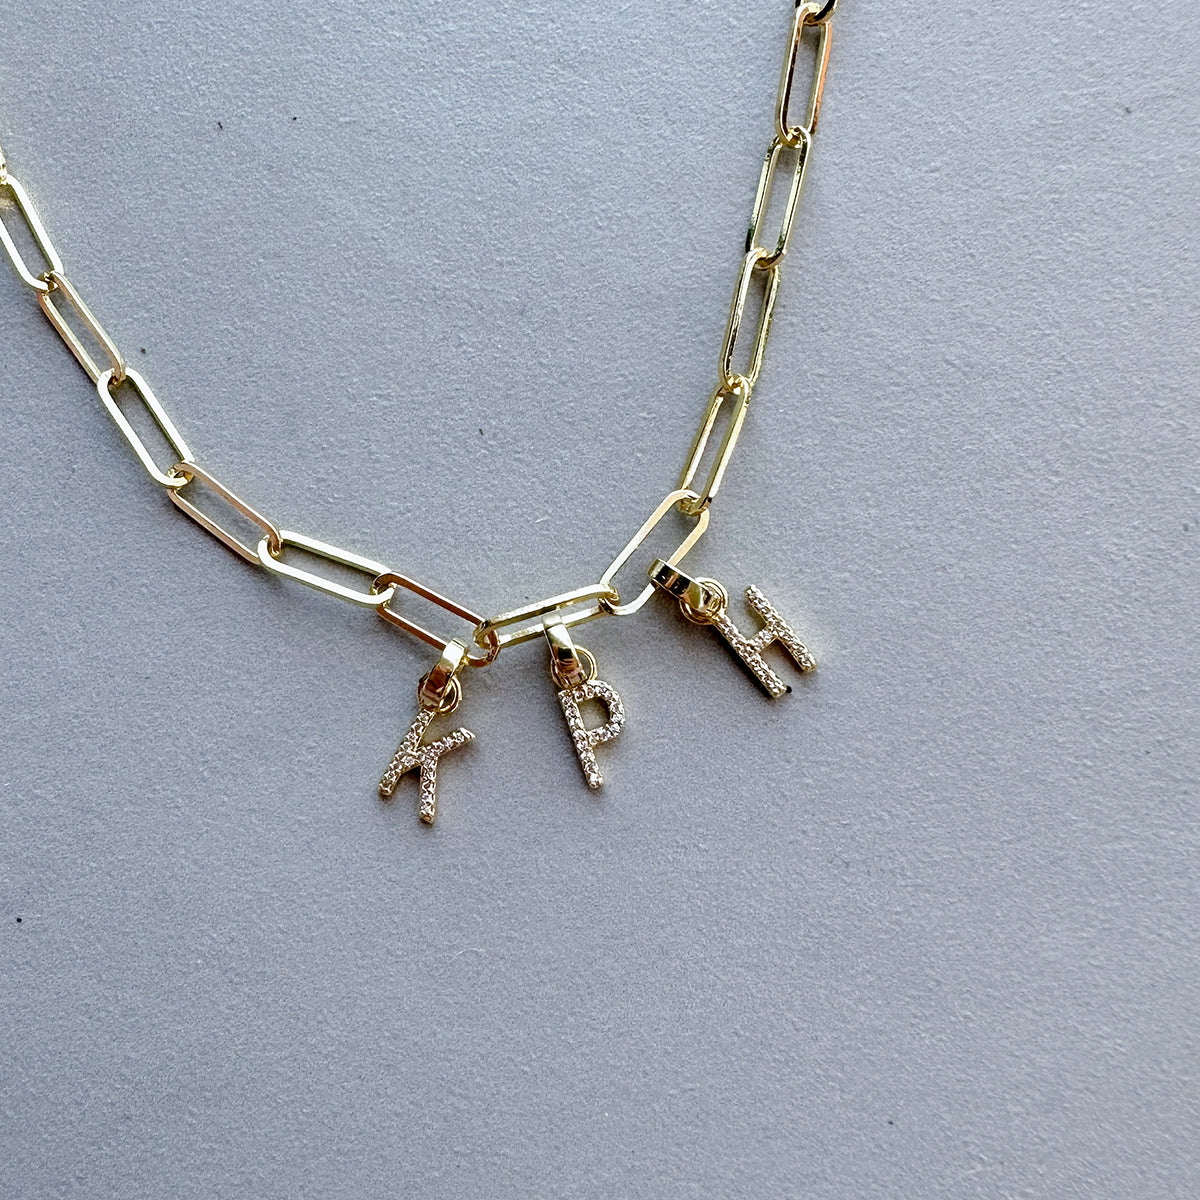 Gold Letter Chain Necklace with Initial T | Women's Jewelry by Uncommon James